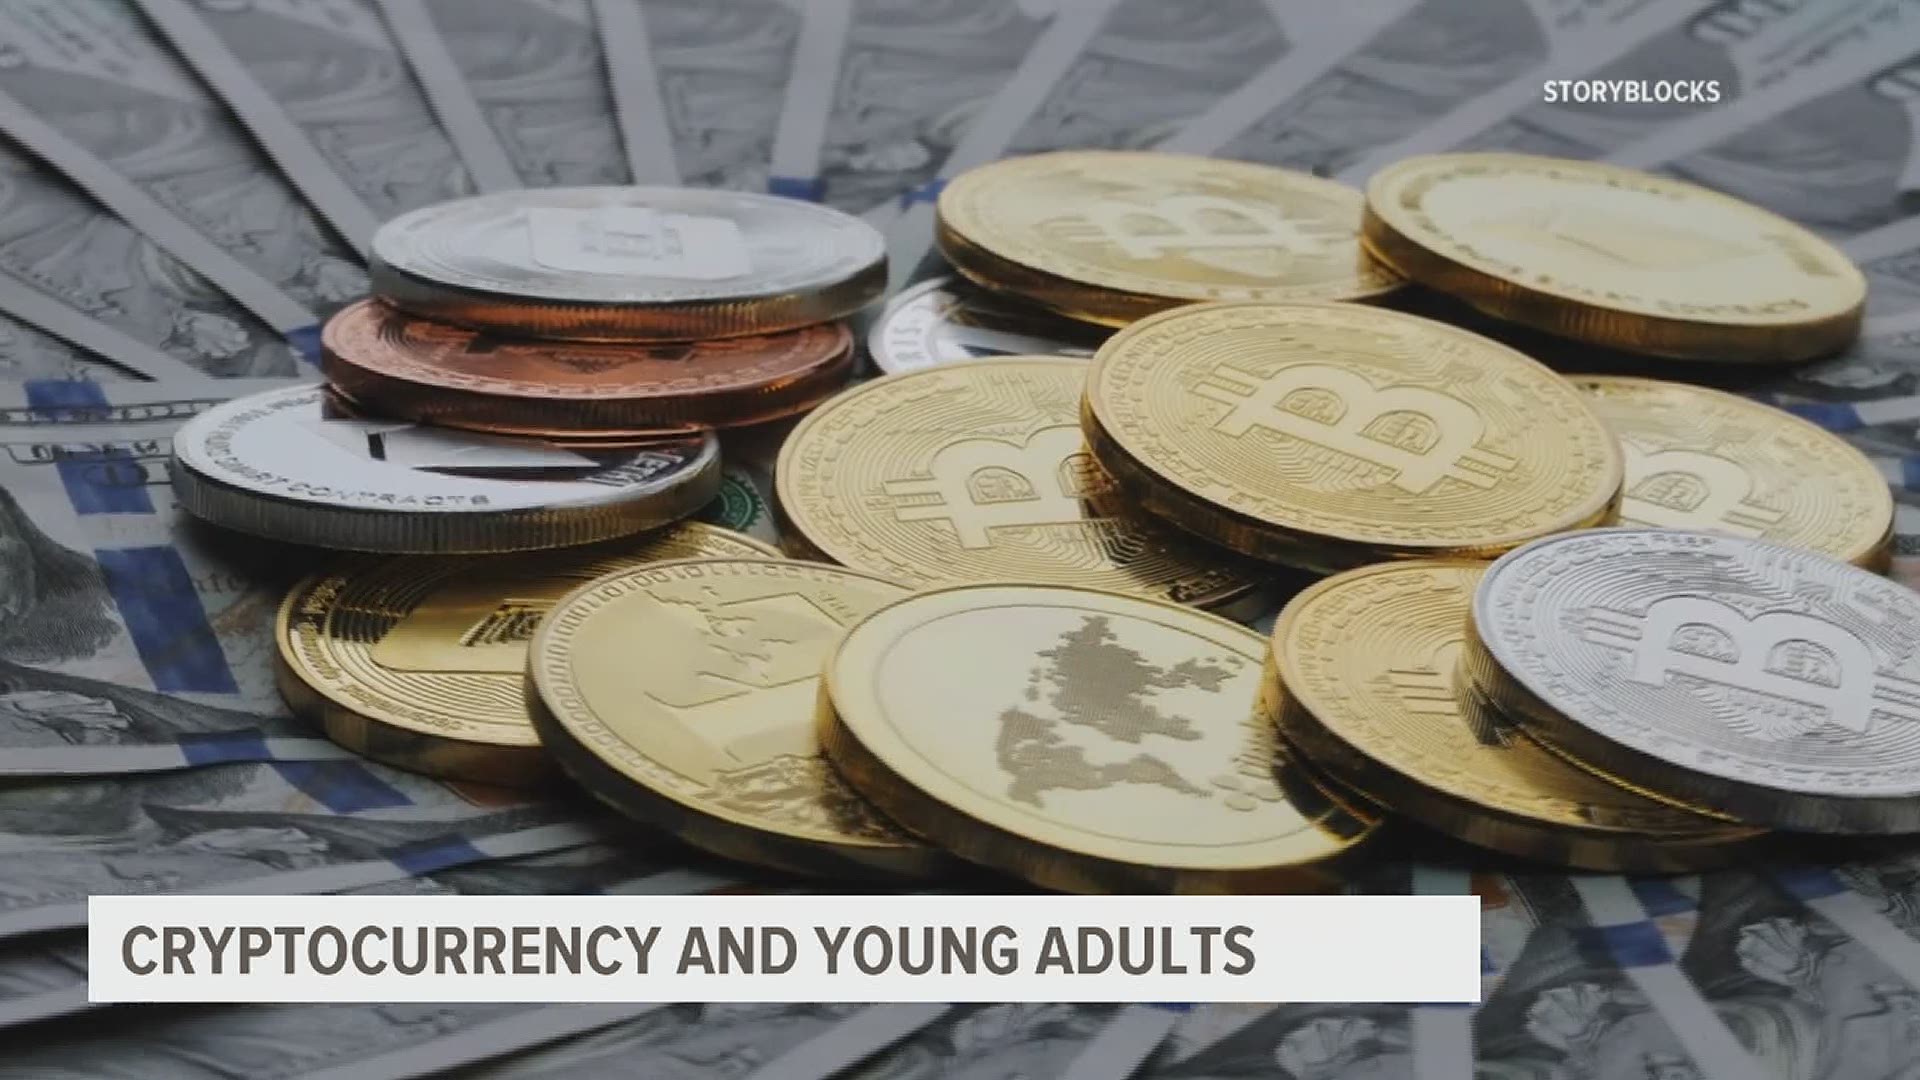 Check out FOX43's interview with Hunter Dillman, a student at Millersville University who invests in four cryptocurrencies.